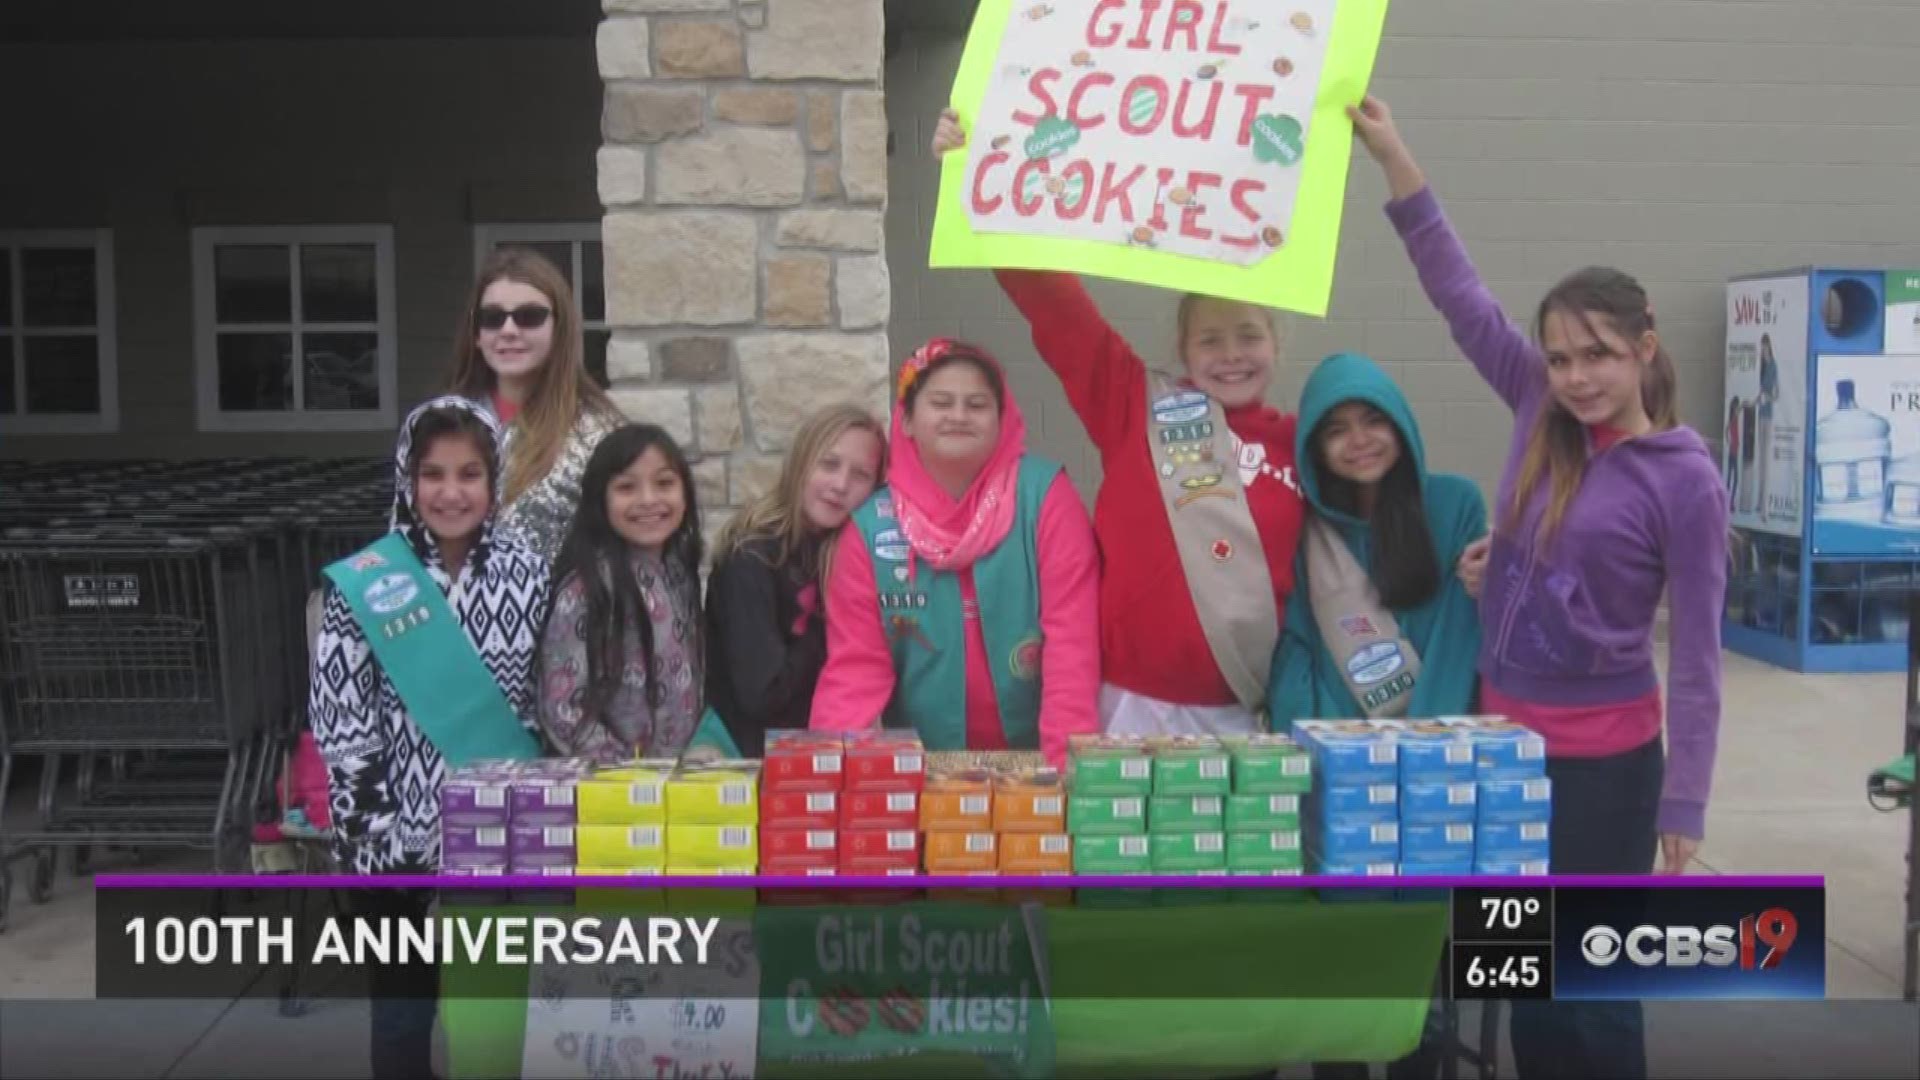 Some girl scouts visited CBS19 this morning to talk about a tradition 100 years in the making.